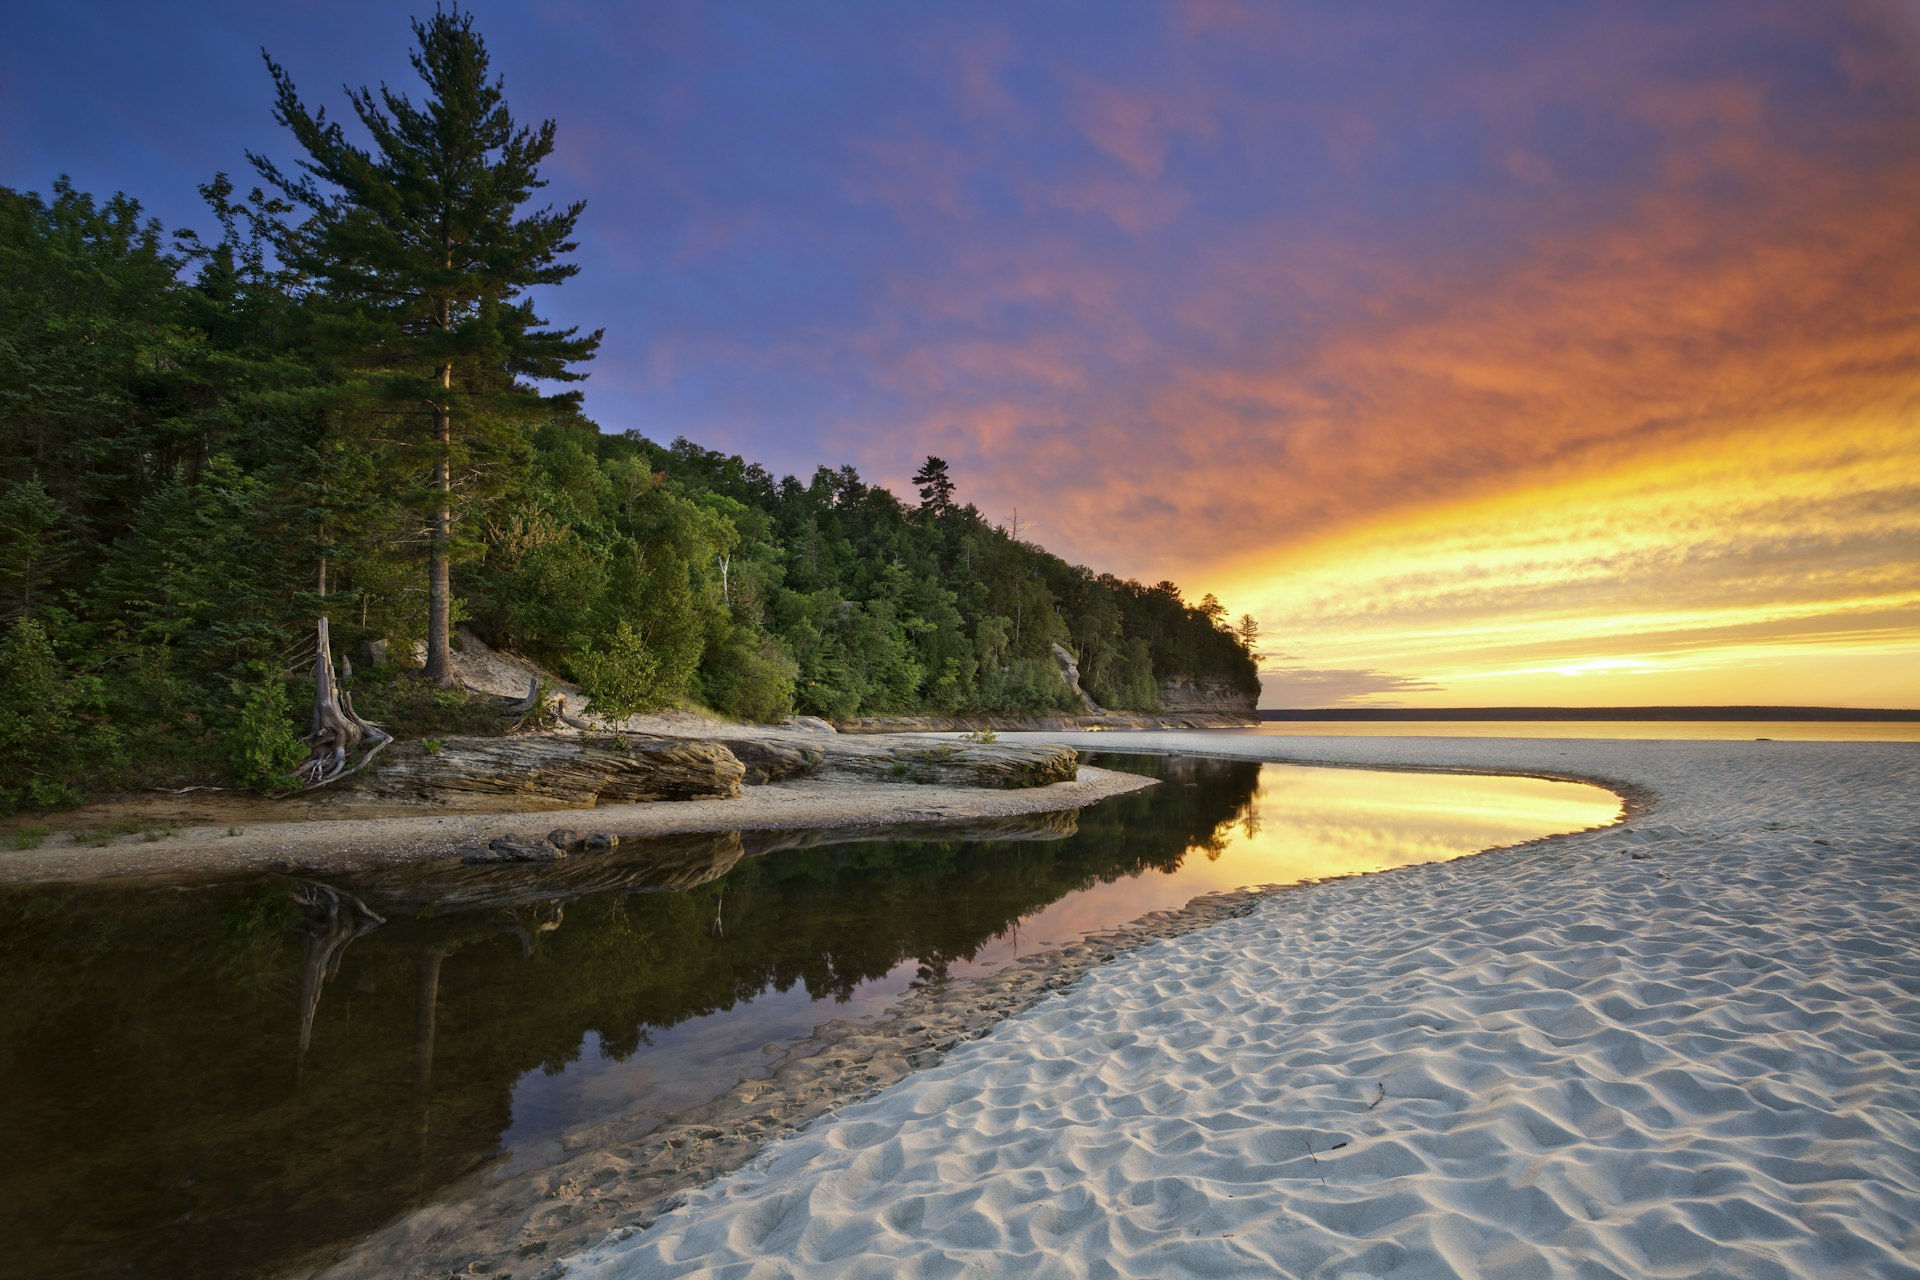 The forest meets the sand during sunset at Miners Beach at Pictured Rocks National Lakeshore.